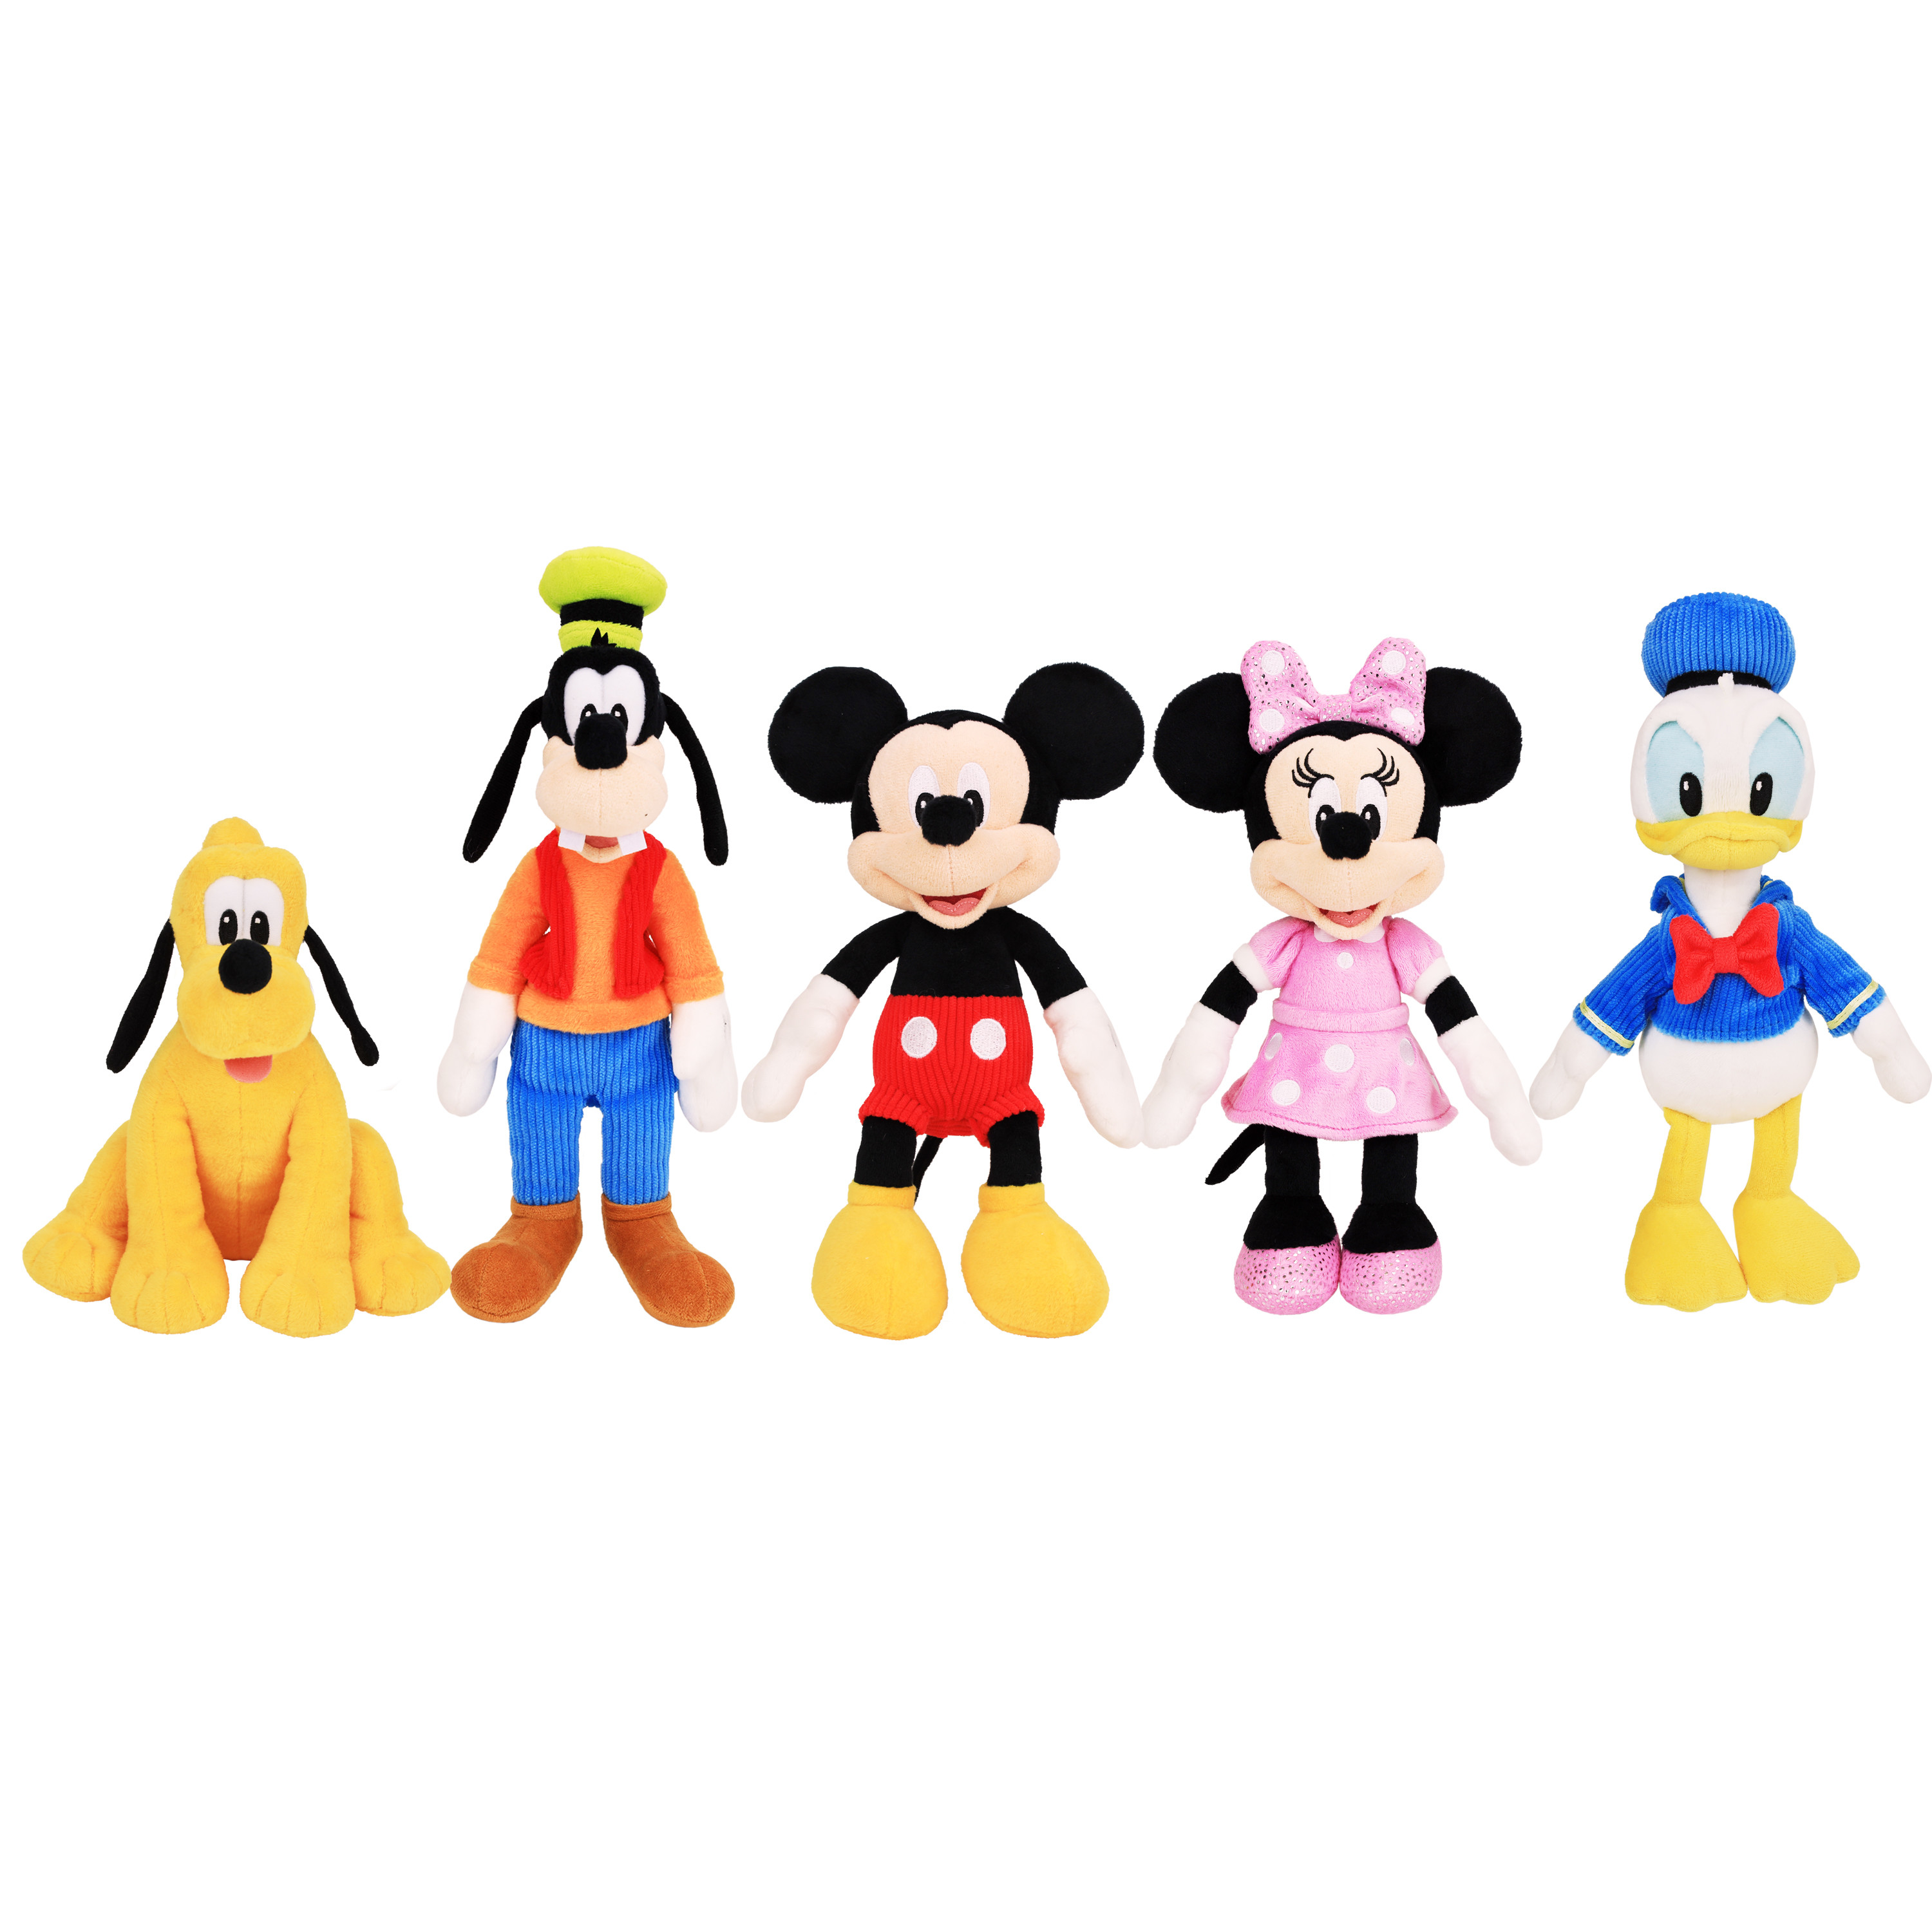 Mickey Mouse Clubhouse 9-inch Plush 5-pack, Mickey Mouse, Minnie Mouse, Donald Duck, Goofy, and Pluto, Stuffed Animals, Officially Licensed Kids Toys for Ages 2 Up, Gifts and Presents - image 1 of 6